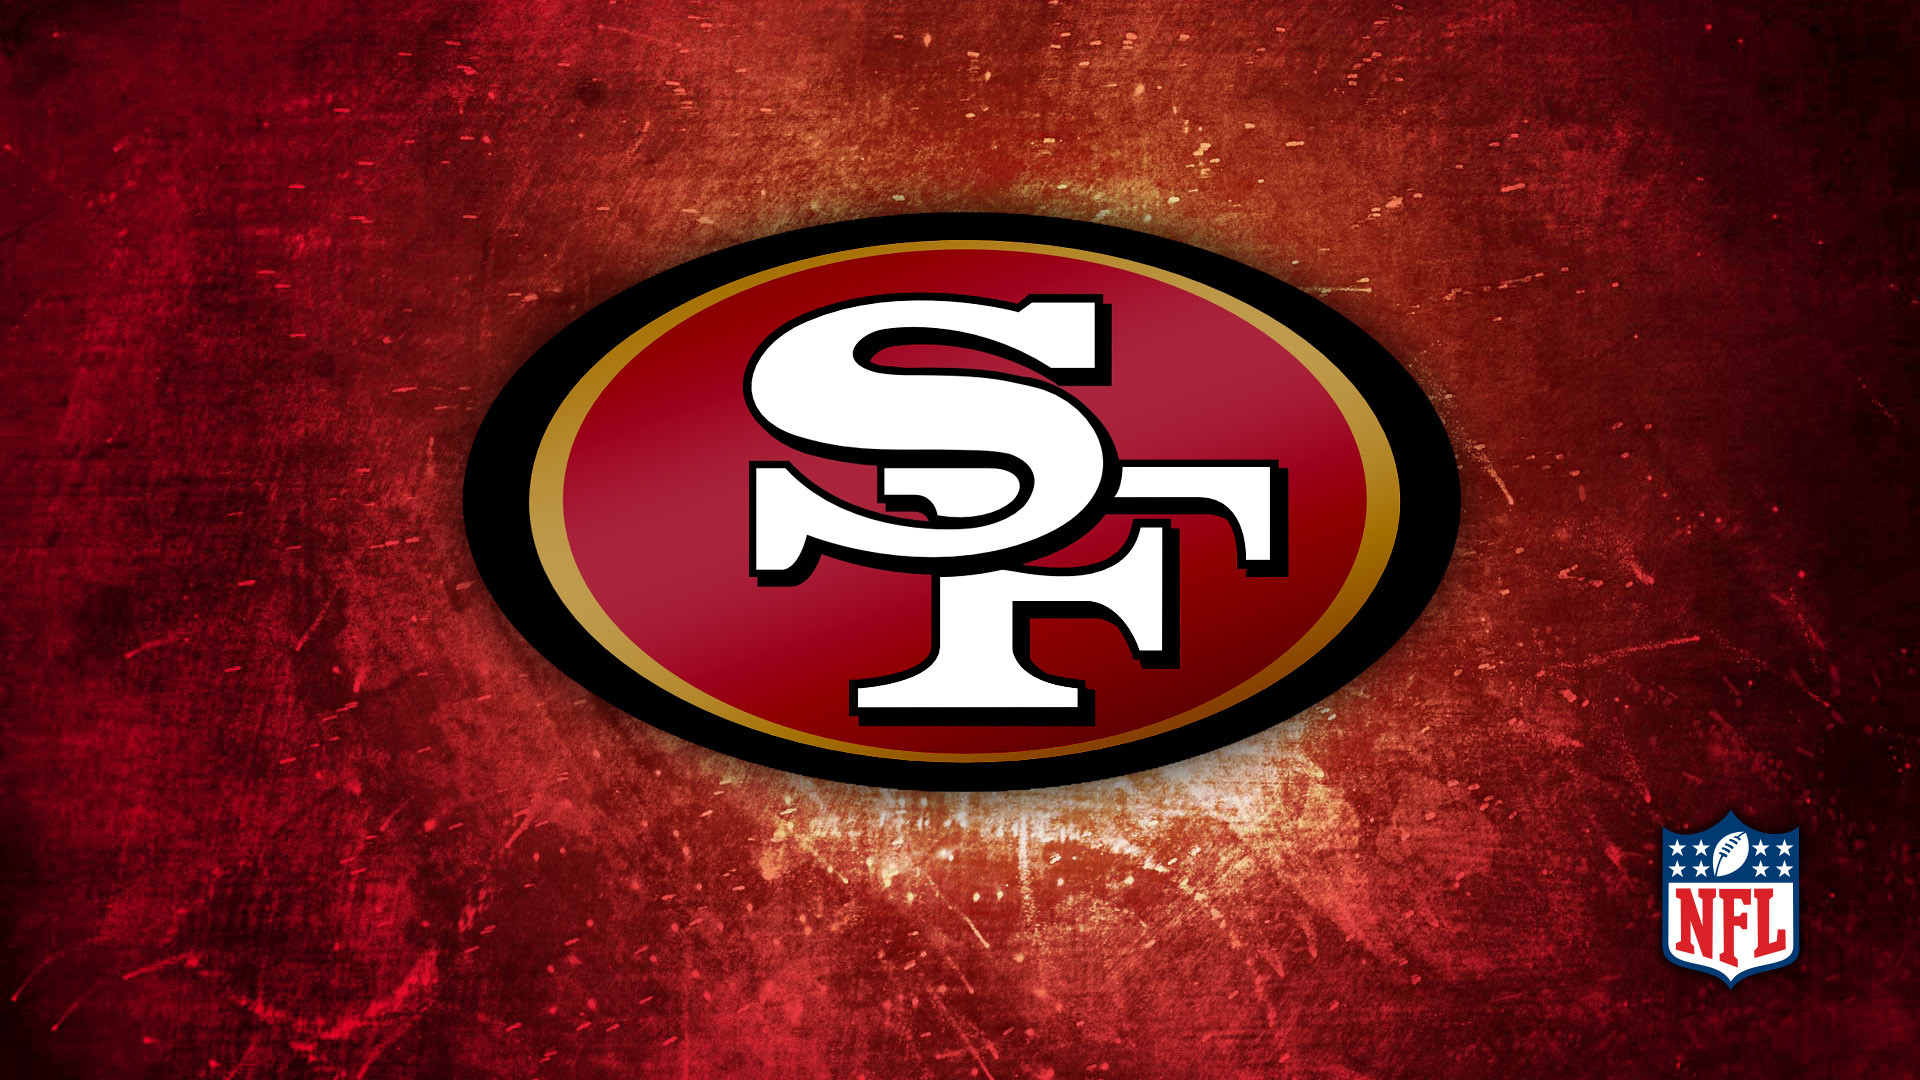 1920x1080 49ers Red & Gold Logo  HD Image Sports / NFL Football